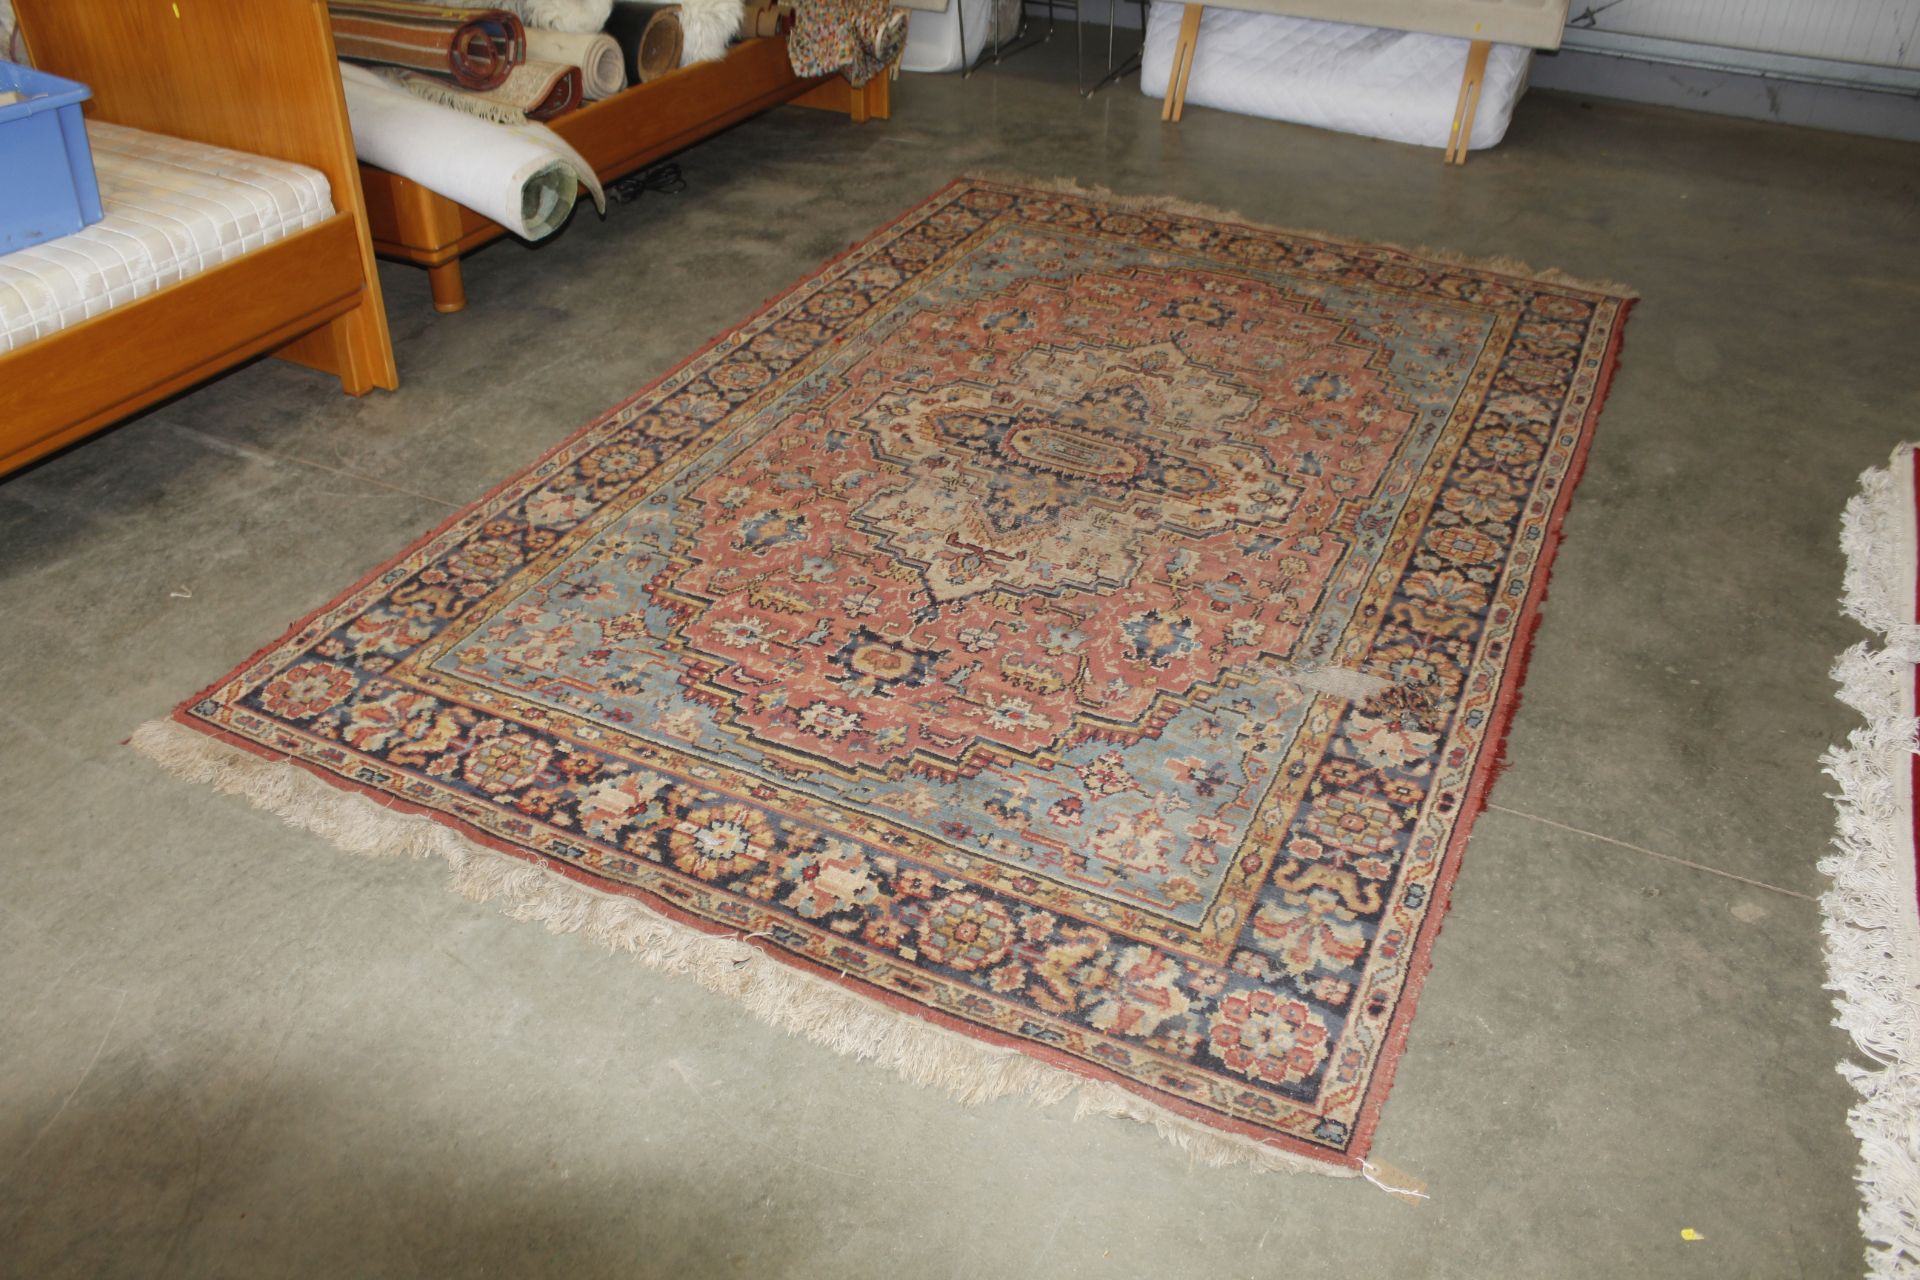 An approx. 10' x 6'3" floral patterned wool rug AF